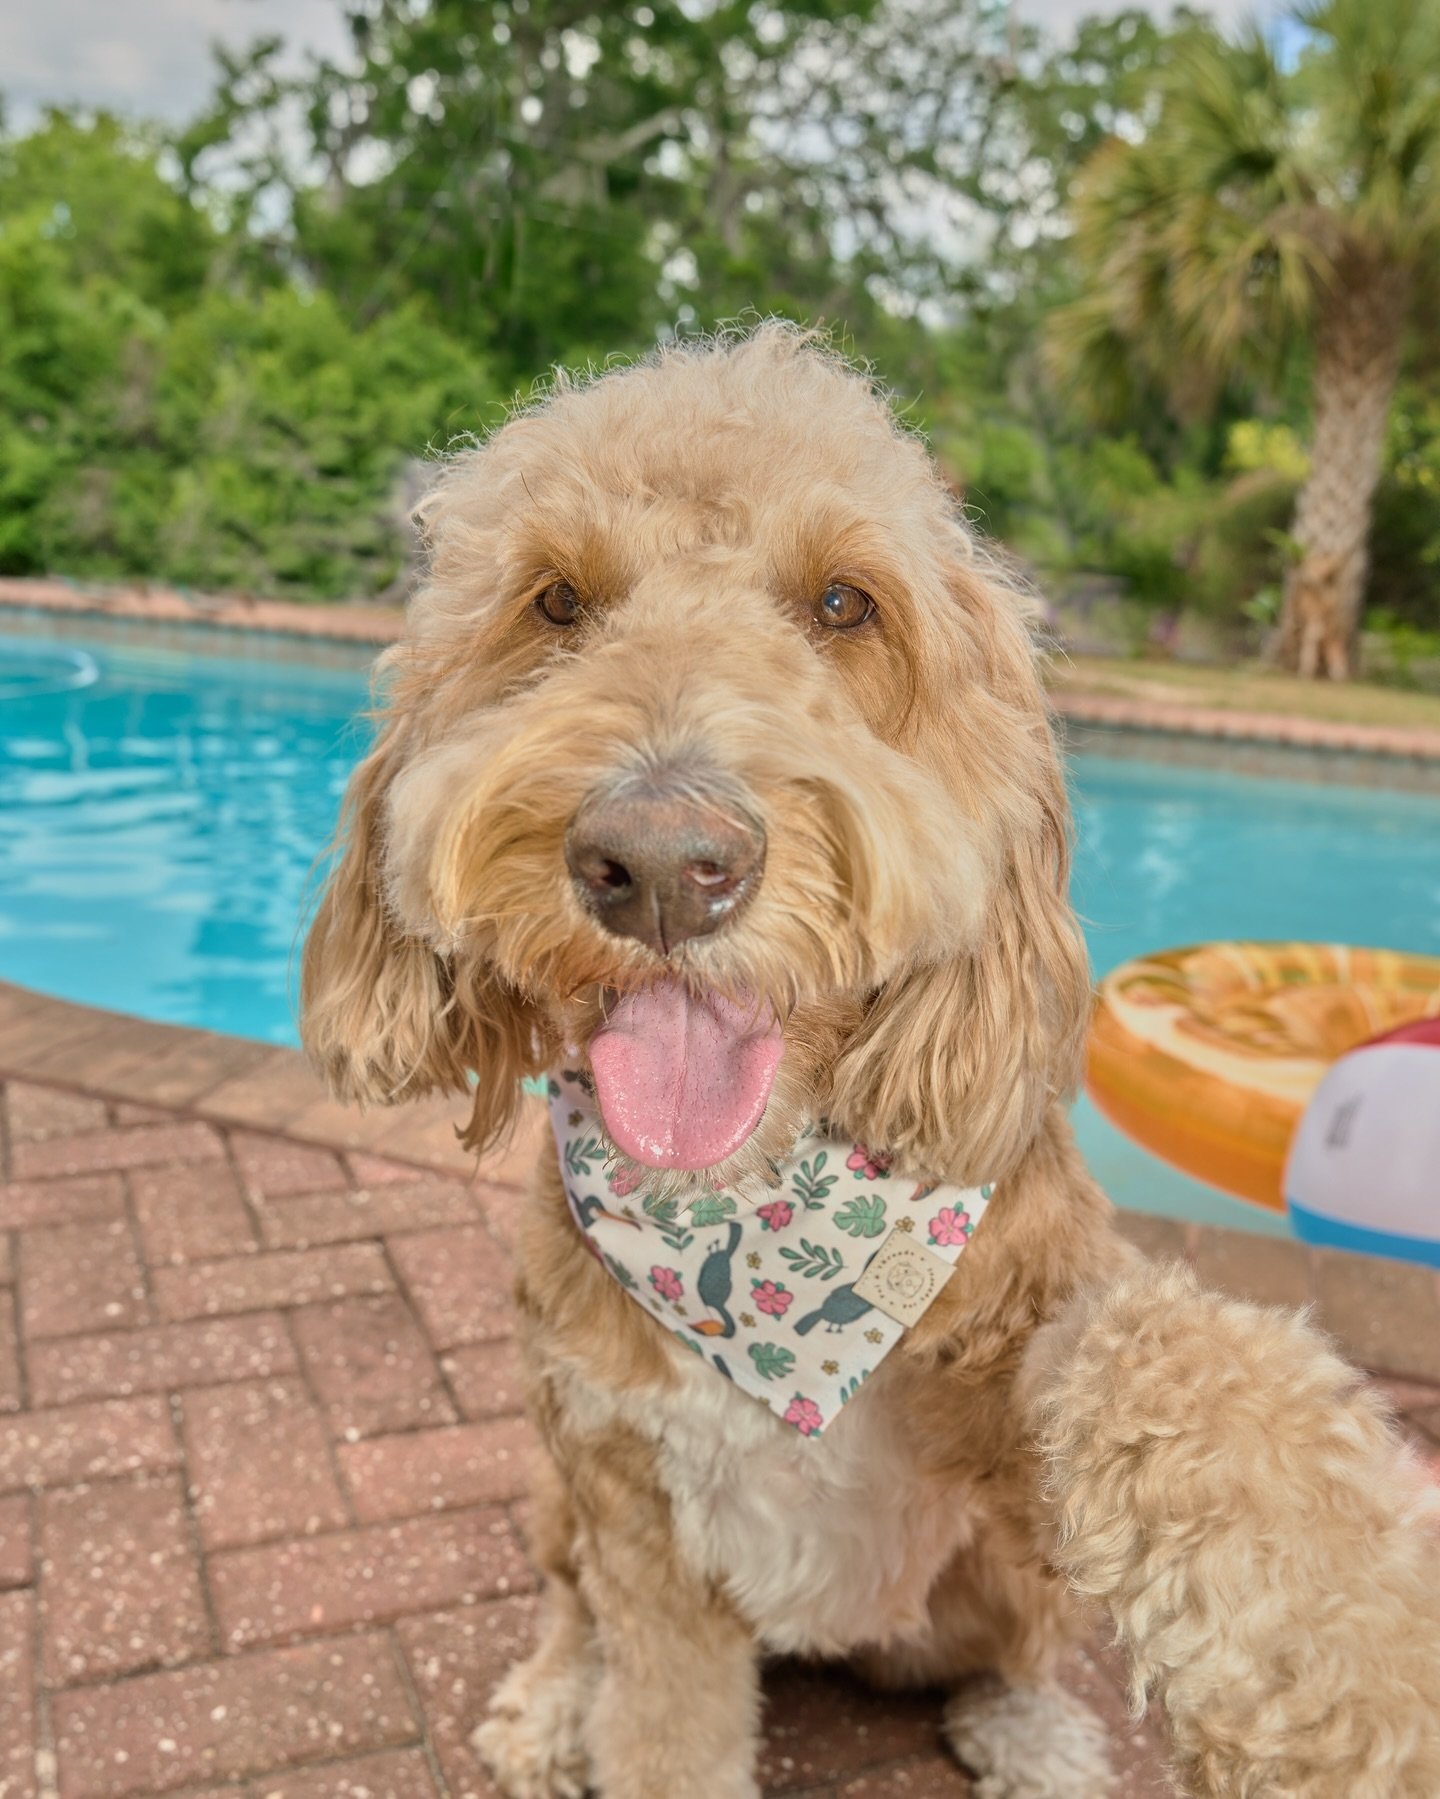 But first, let me take a selfie 📸
Summer collection in T-minus 2 days! 🚀 Keep an eye out for more sneak peeks 👀
.
.
.
#peiandthreads #dogsofinstagram #dogbandanas #doodlelovers